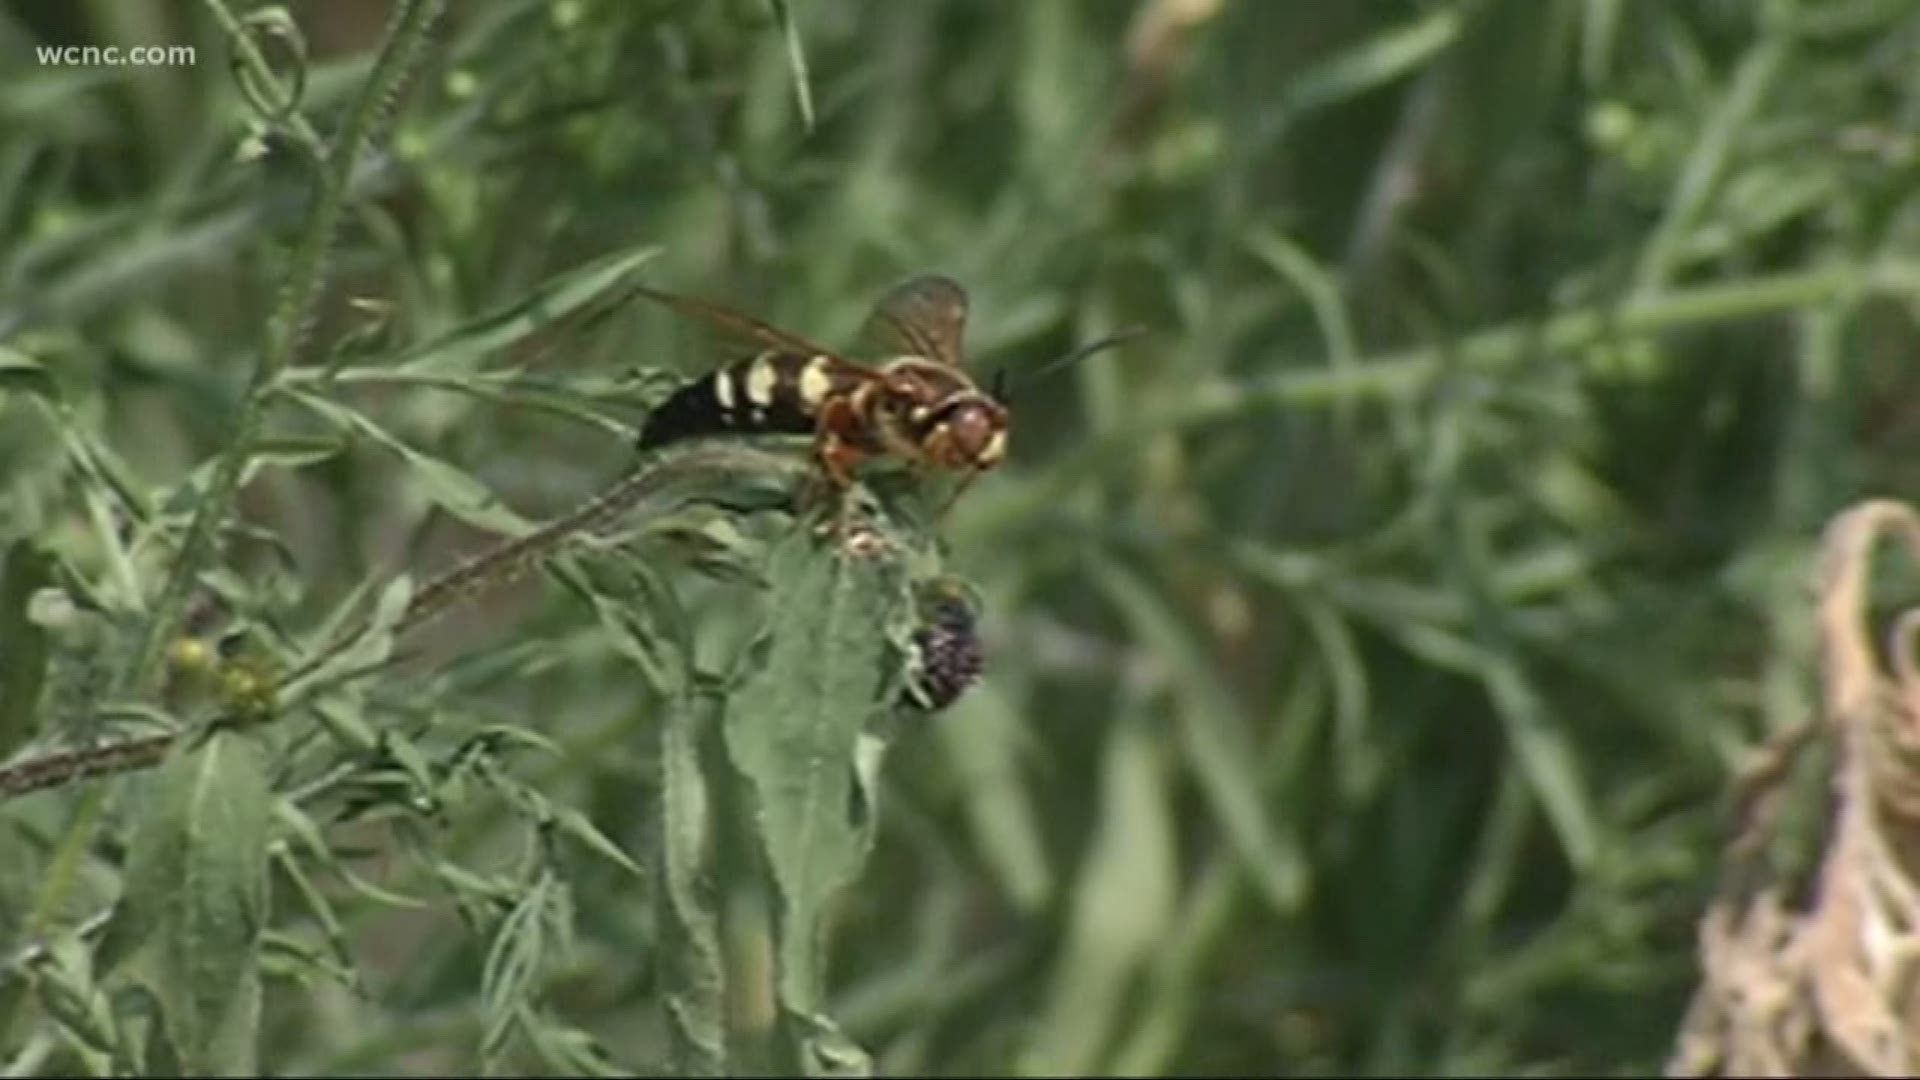 Cicada killer wasps swarm Carolinas: What can you do to get them off your lawn?